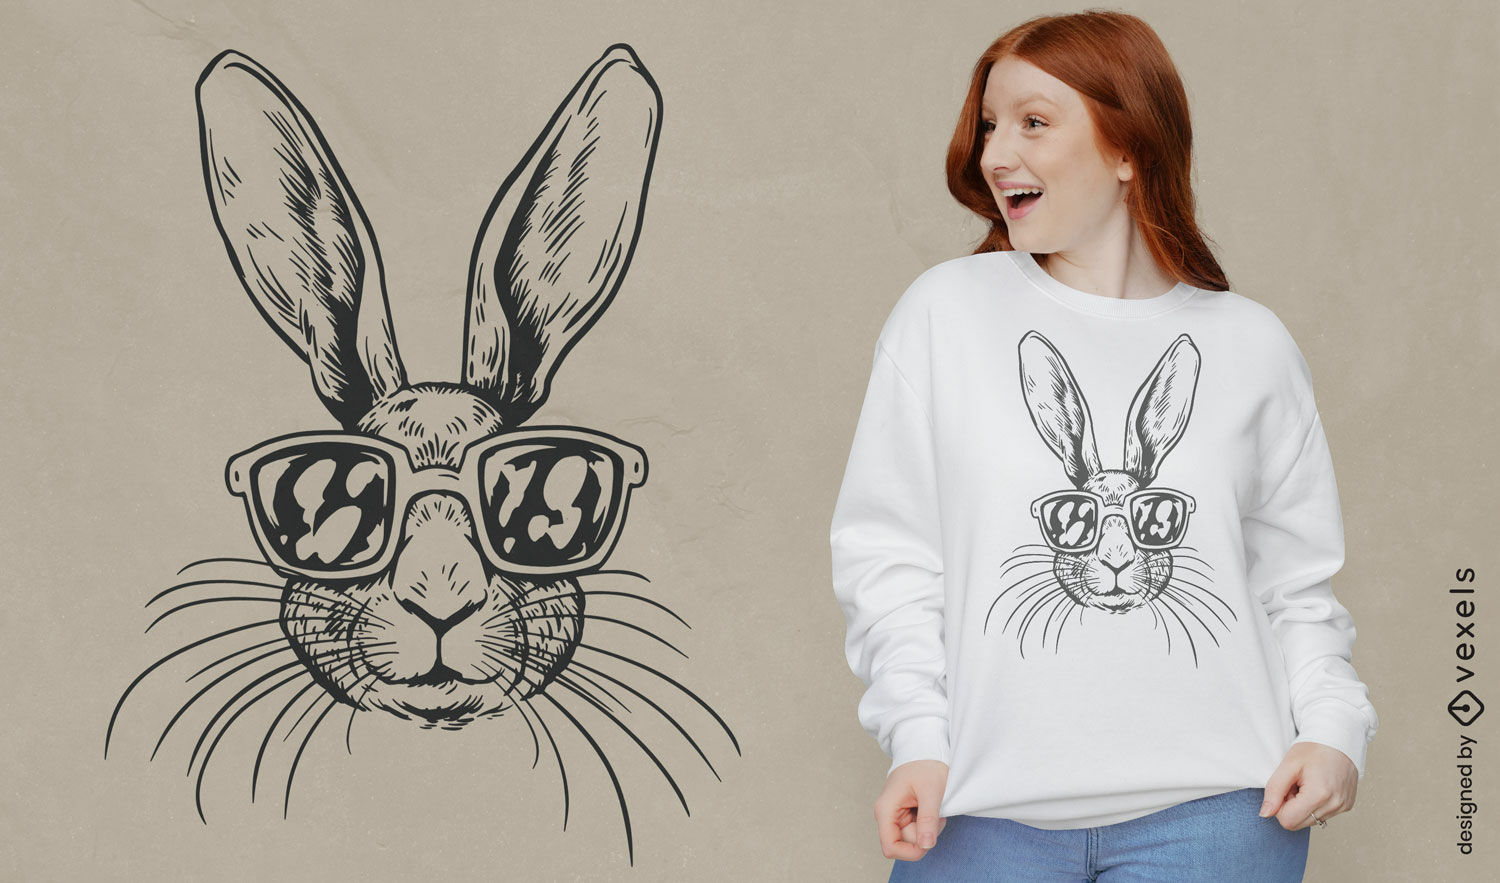 Hipster bunny with sunglasses t-shirt design